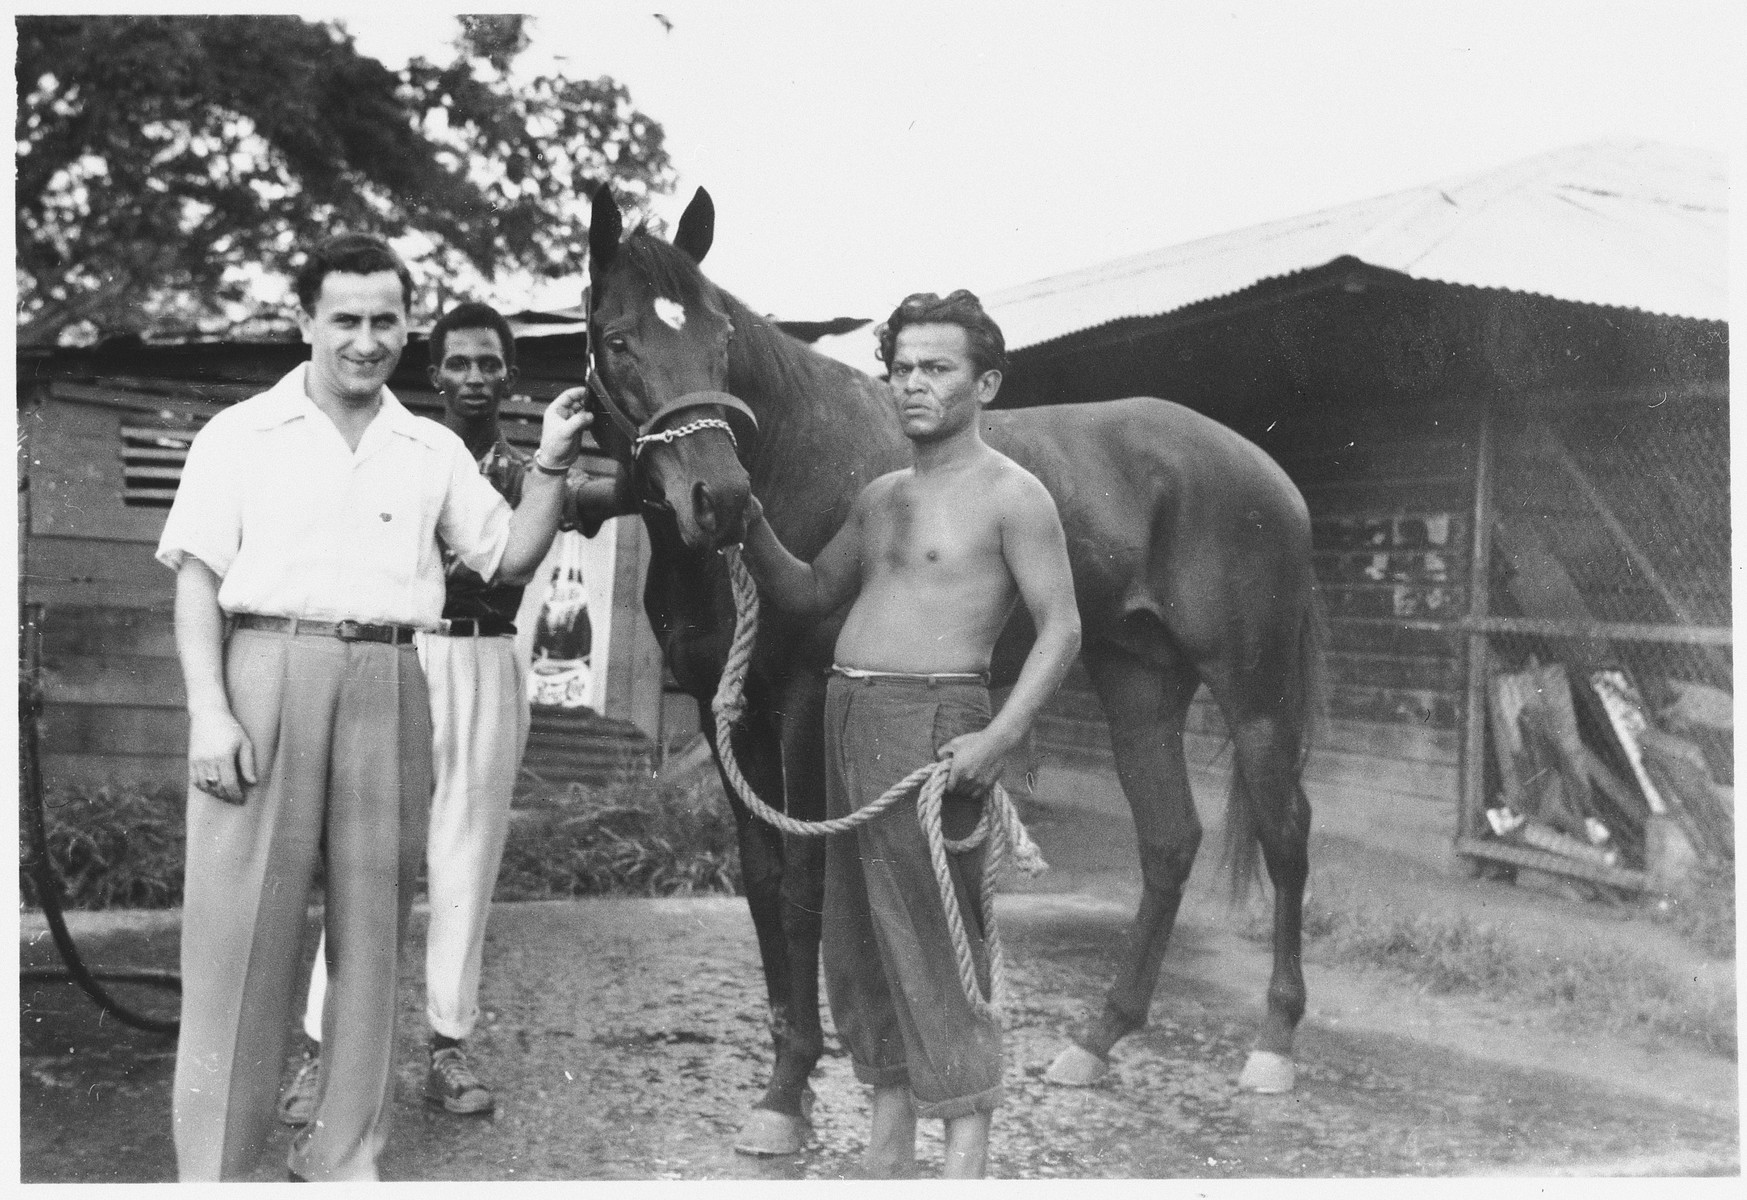 David Bayer, a Jewish DP immigrant from Poland, stands next to his employer's horse in Panama City.